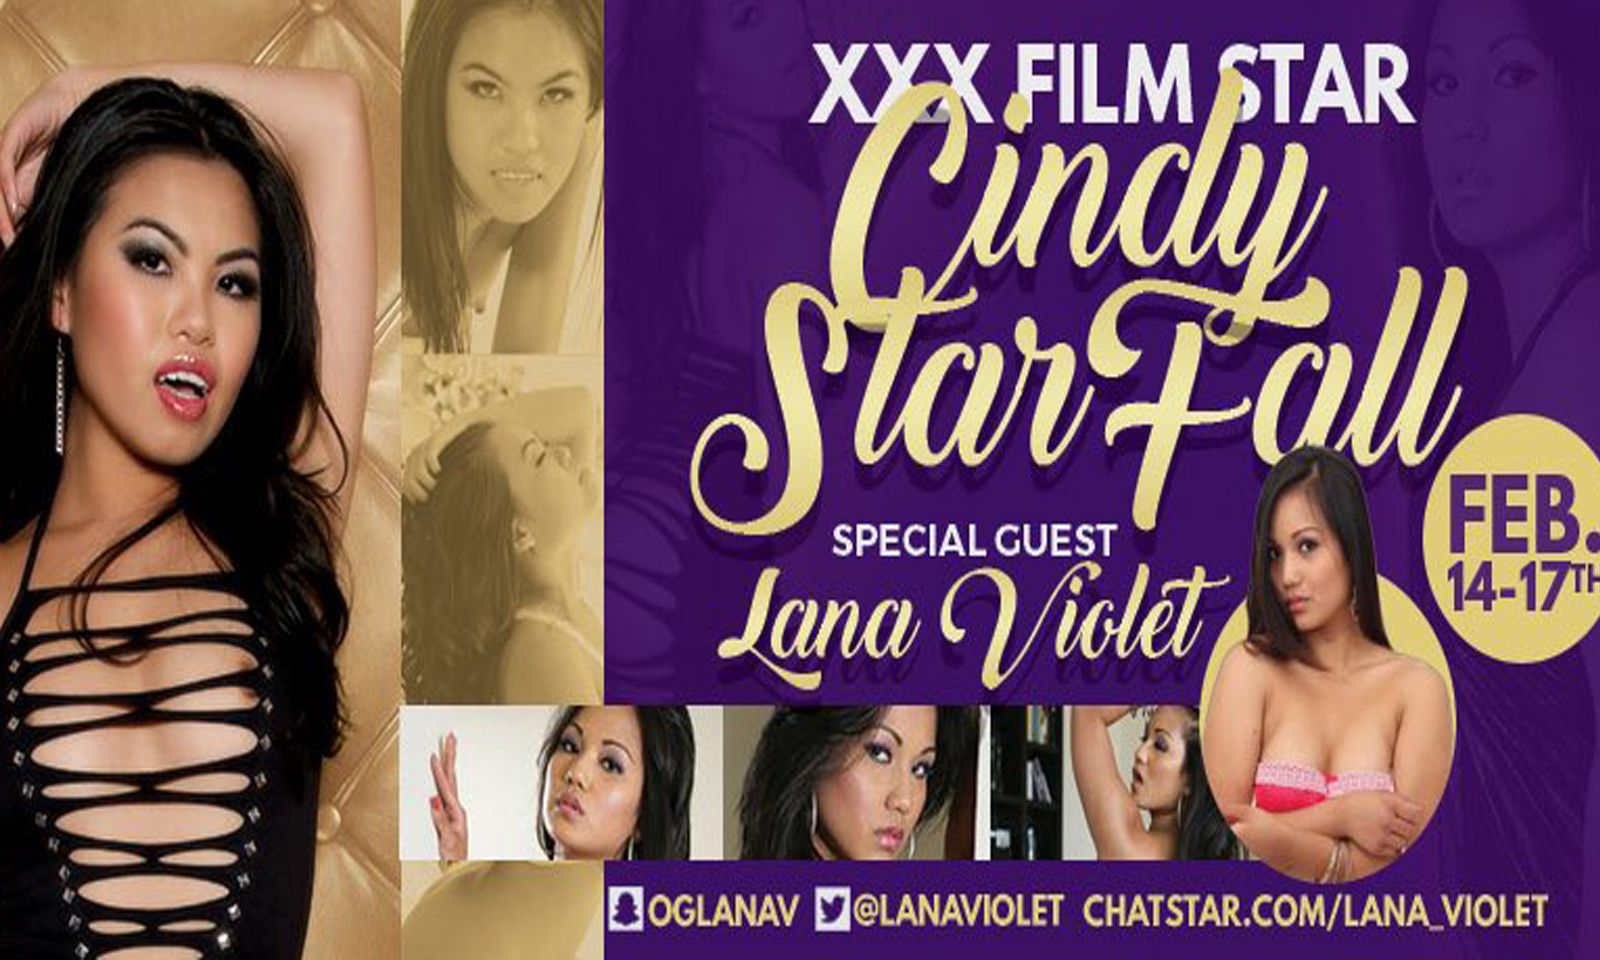 Spend Valentine’s Day with Cindy Starfall at The Red Parrot